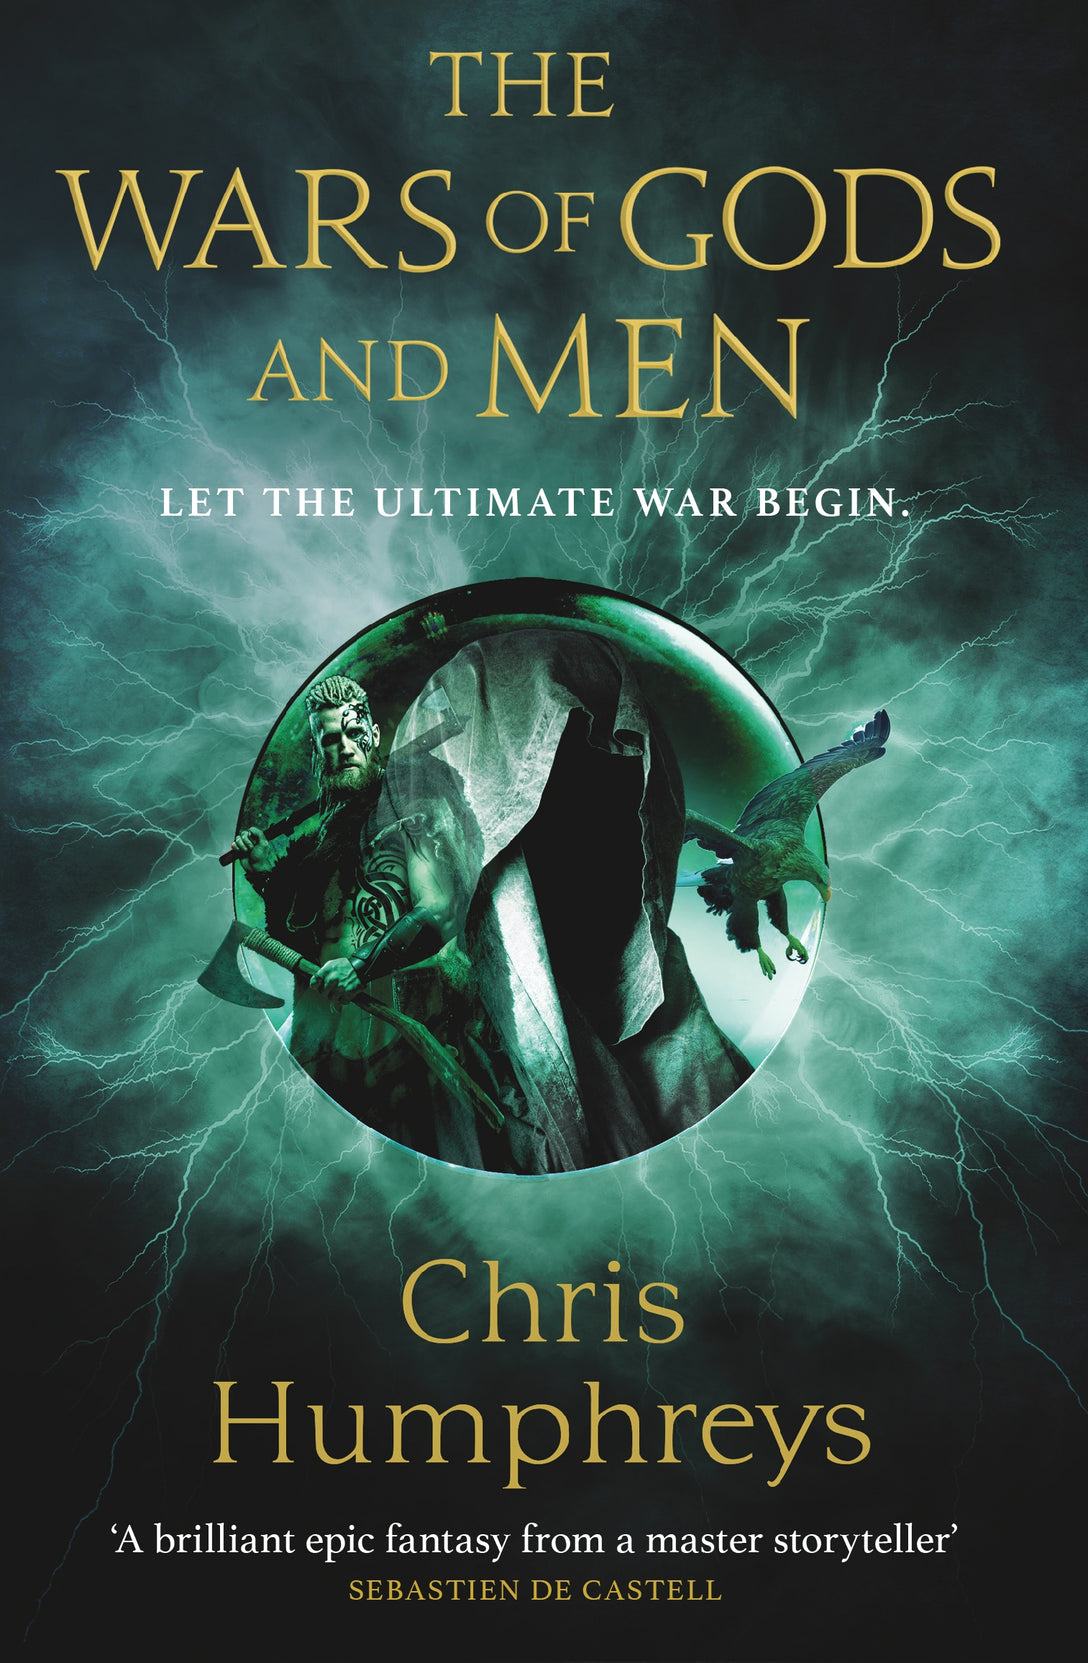 The Wars of Gods and Men by Chris Humphreys